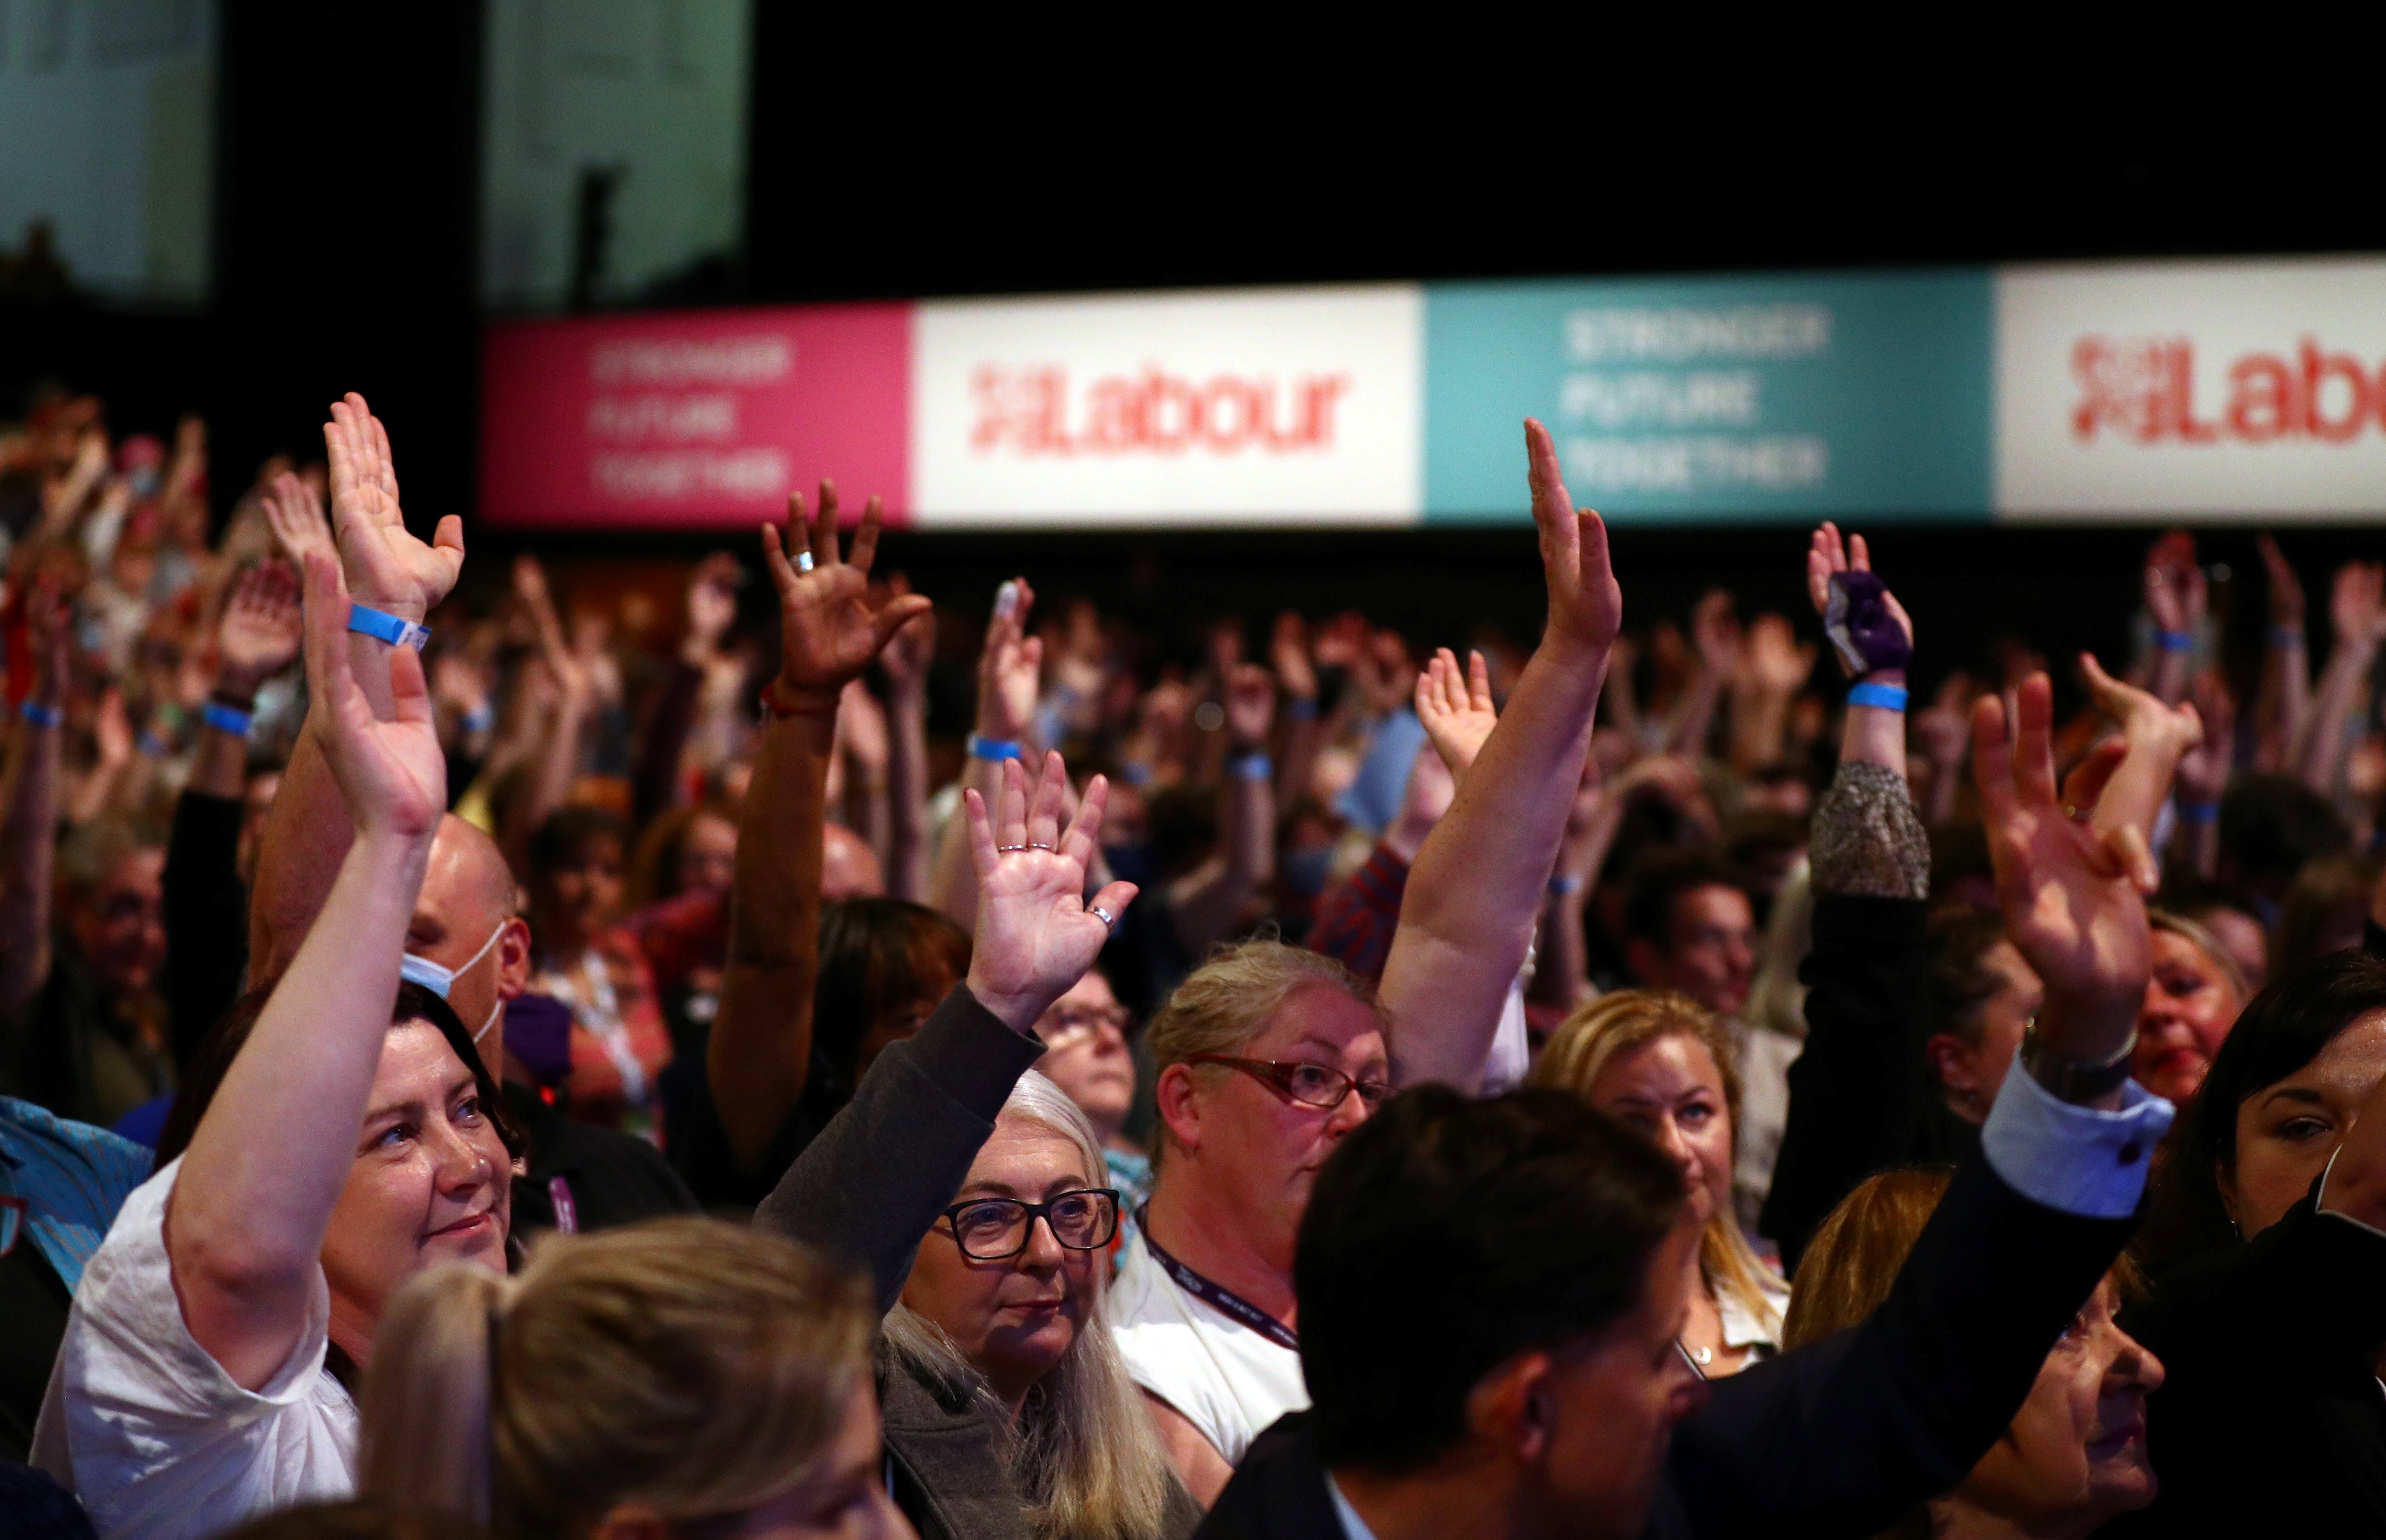 A vote taking place at Labour’s conference in Brighton